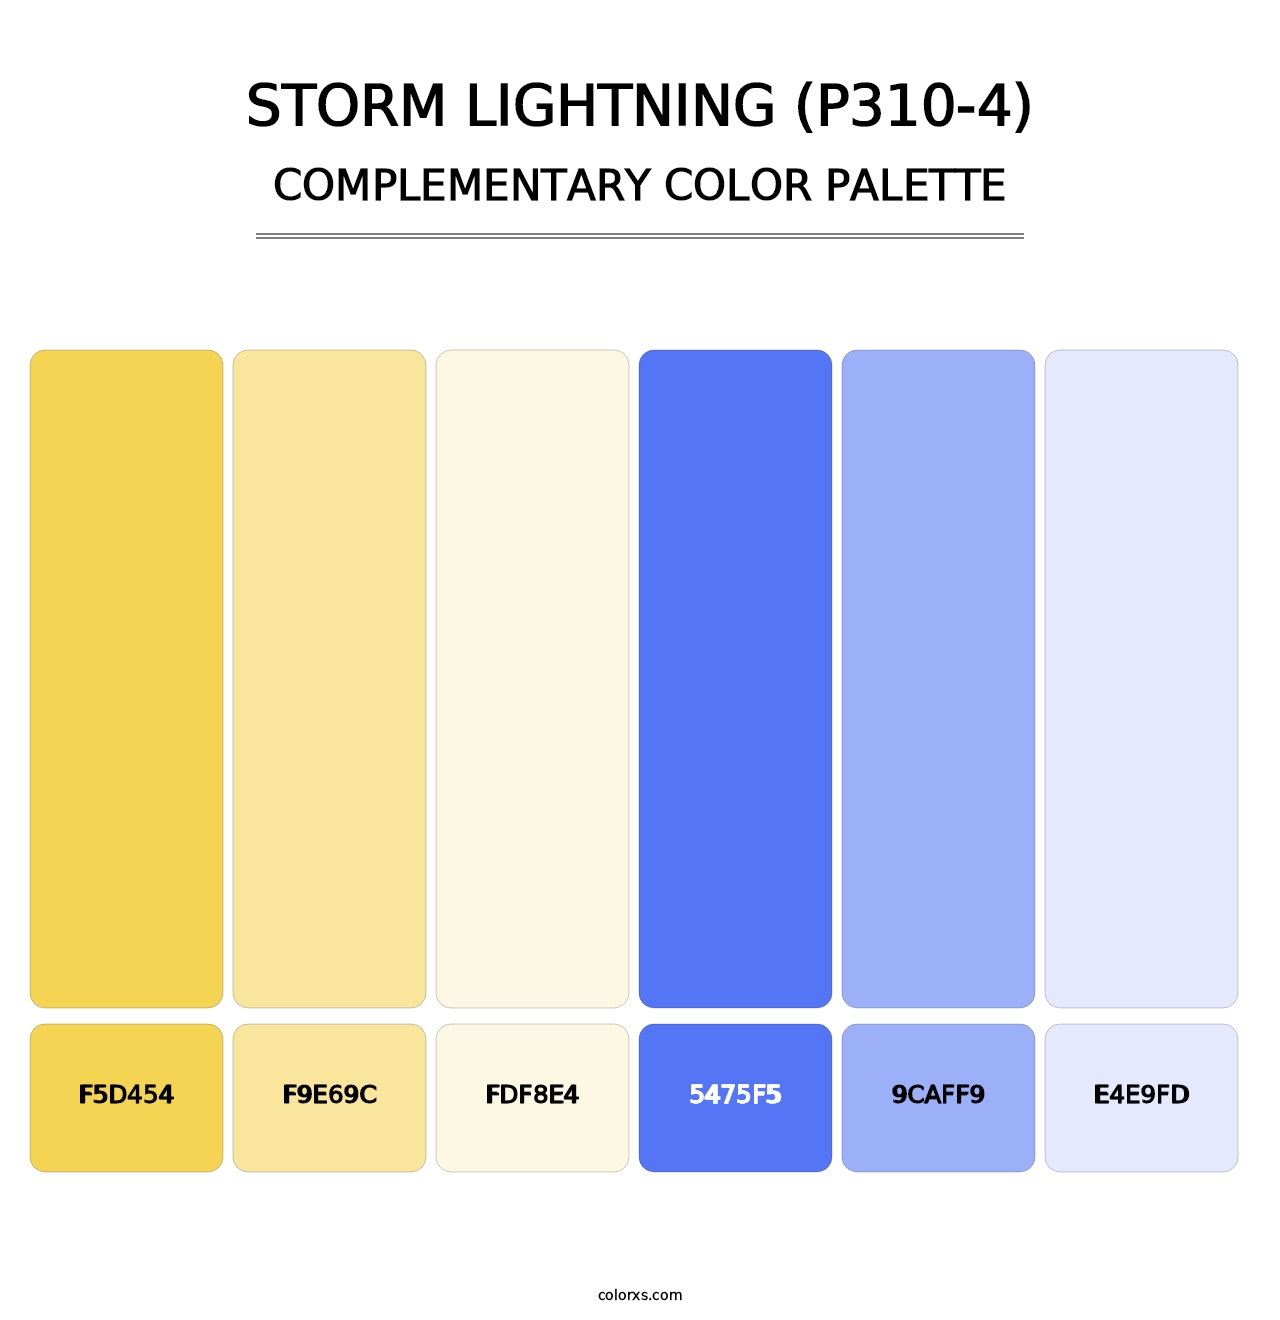 Storm Lightning (P310-4) - Complementary Color Palette